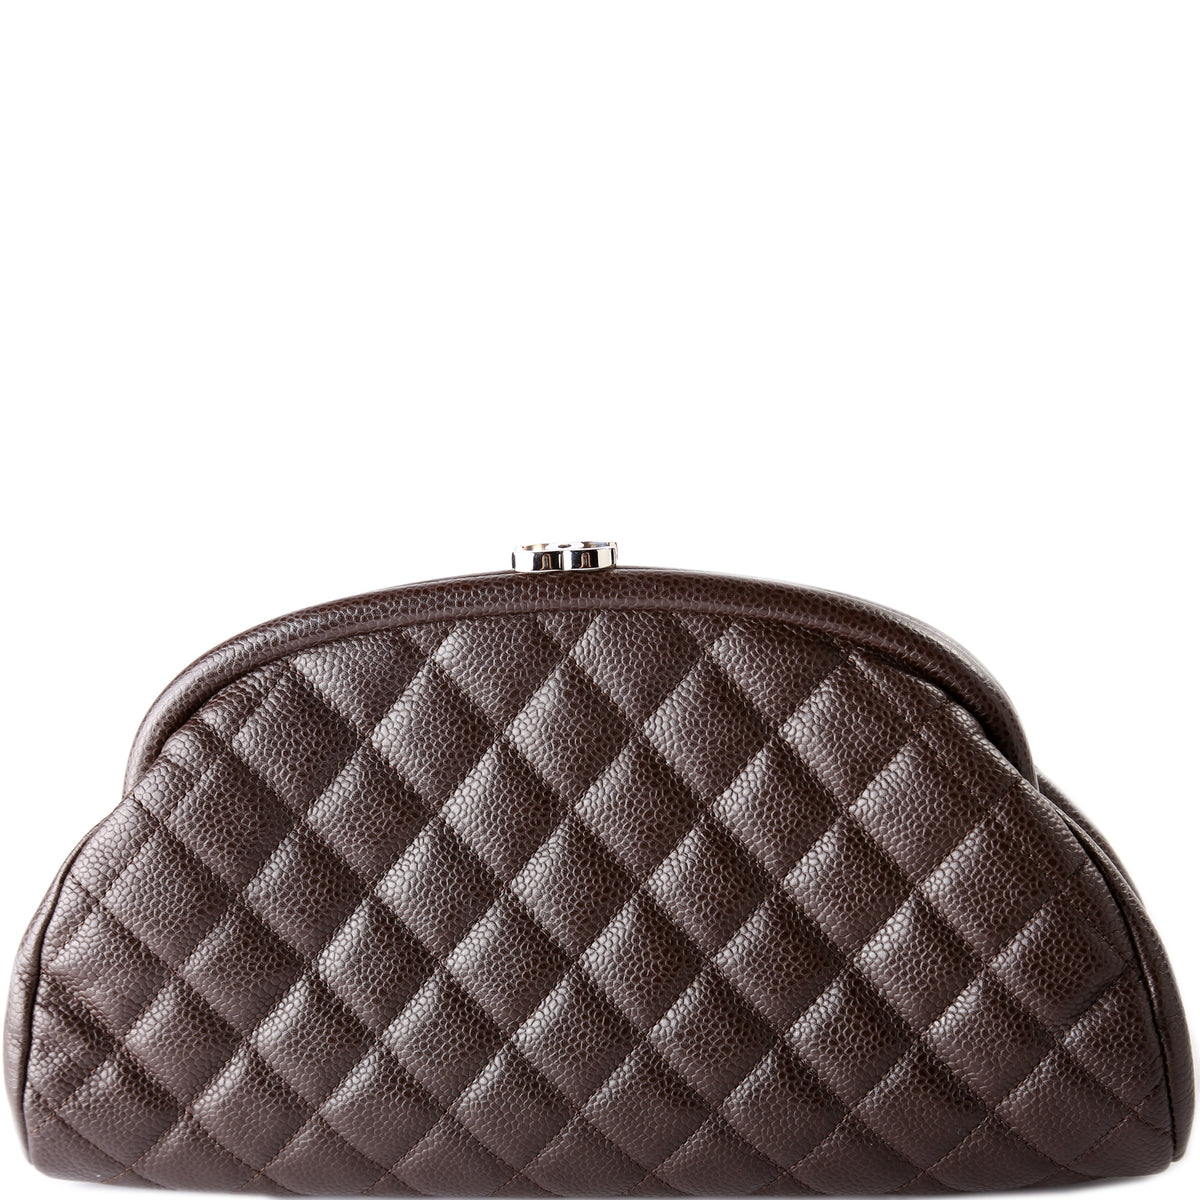 Chanel Authenticated Timeless/Classique Clutch Bag